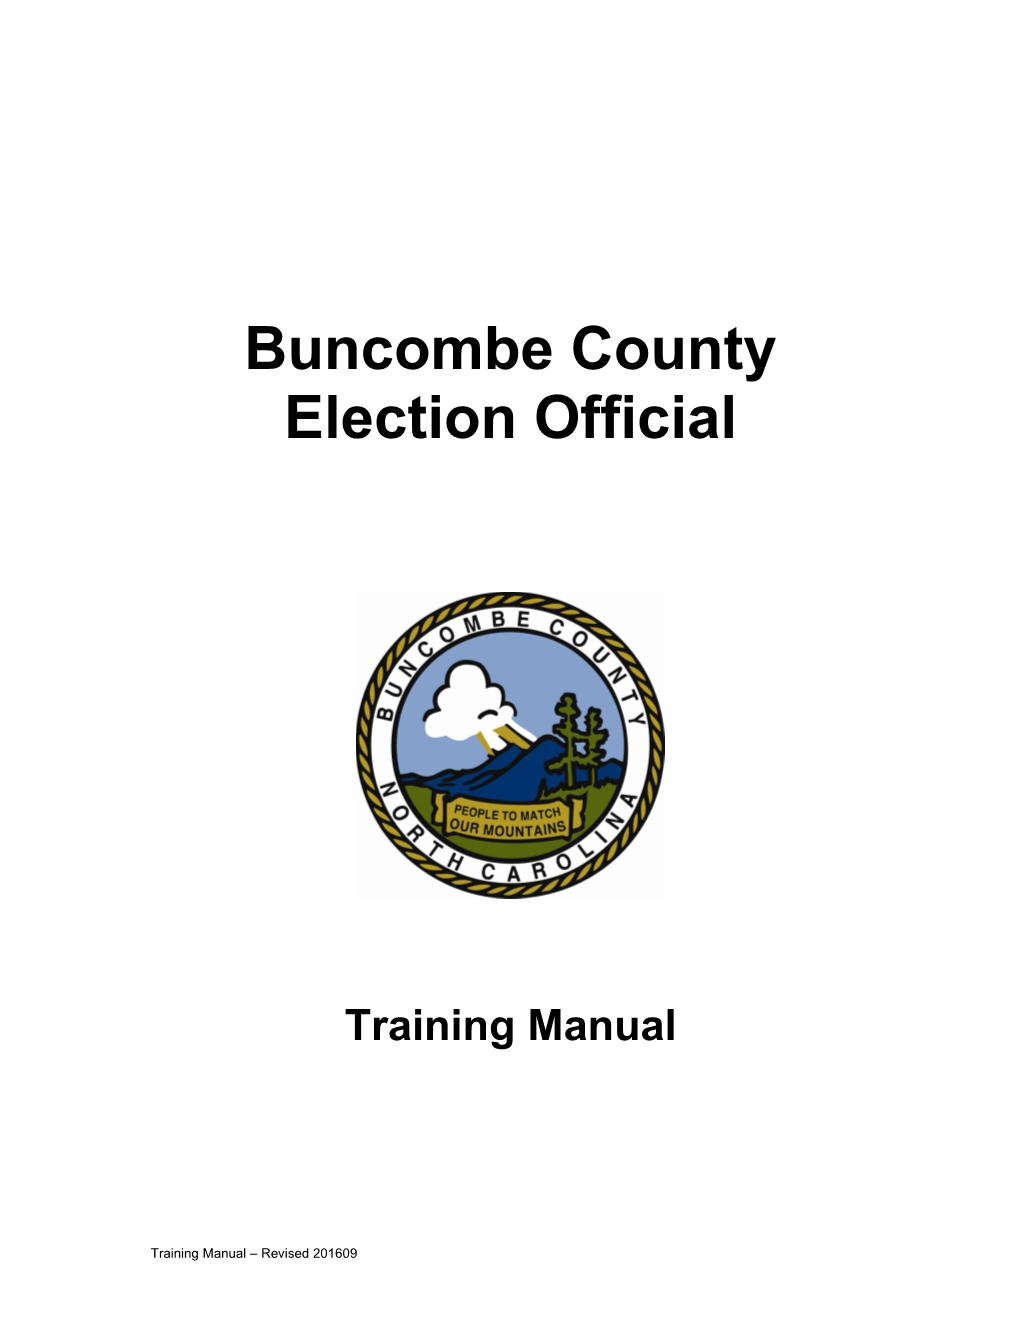 Buncombe County Election Official